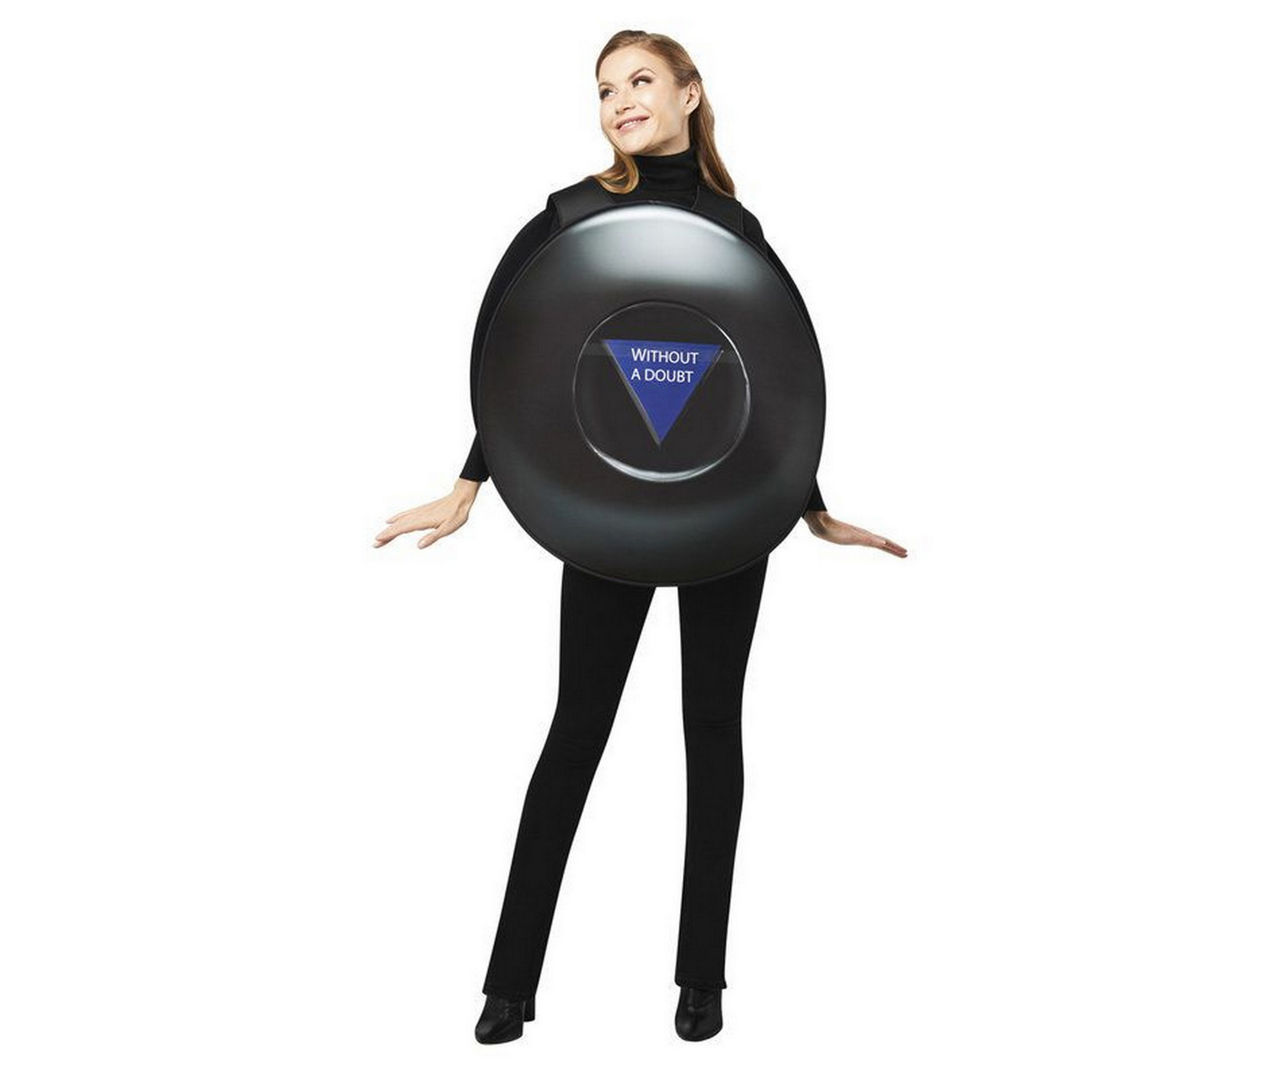 Rubies Mattel Games: Magic 8 Ball Child Costume One Size Fits Most